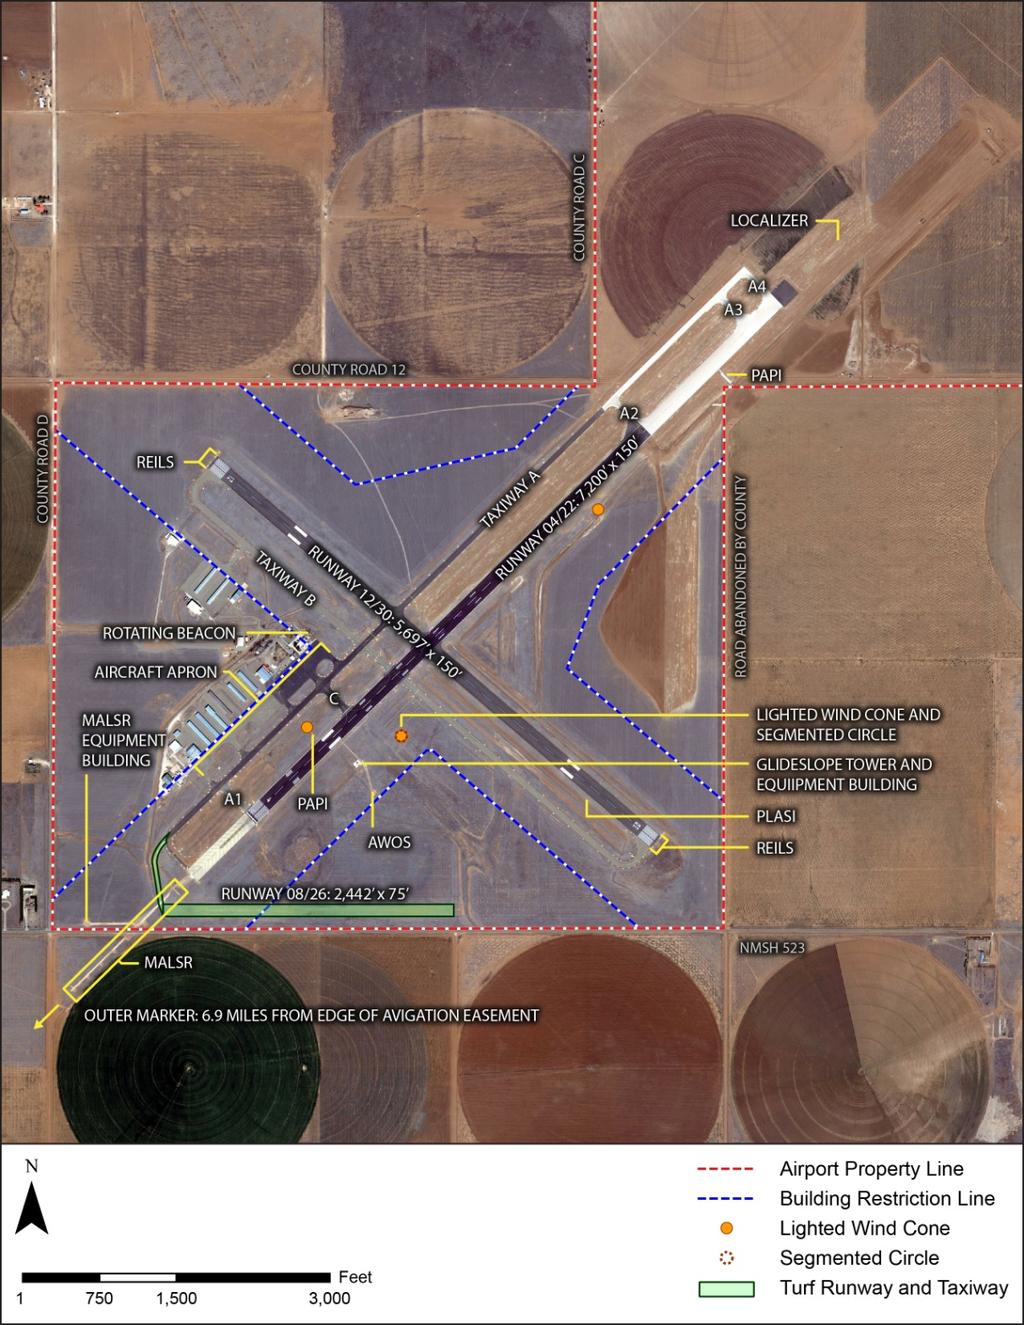 CVN AIRPORT MTER PLAN 1.3 INVENTORY OF AIRSIDE FACILITIES Clovis Municipal Airport supports aviation activity with two paved runways and one turf runway.